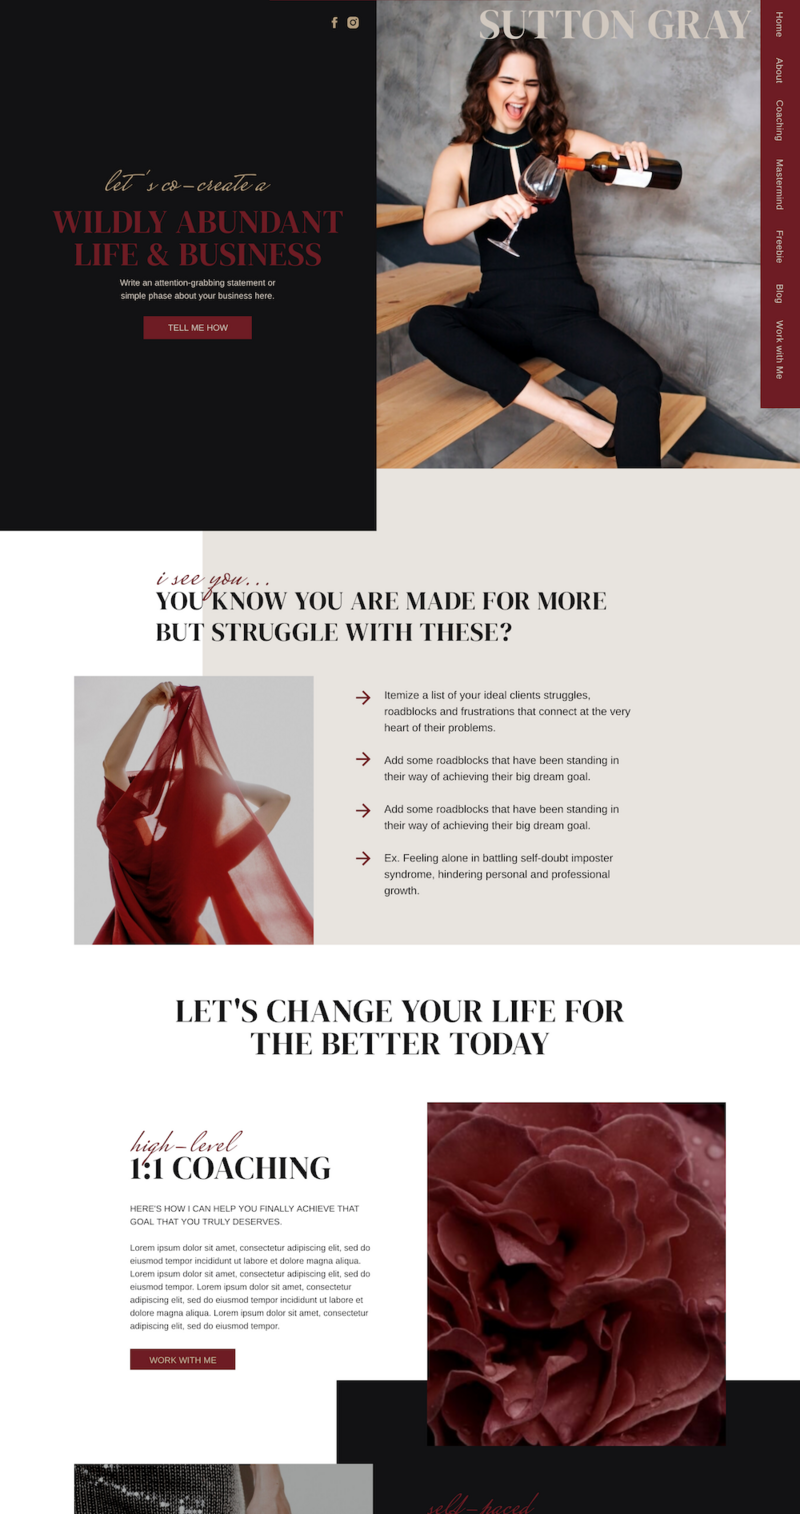 Sutton-Gray-showit-website-template-for-coaches-home-page1